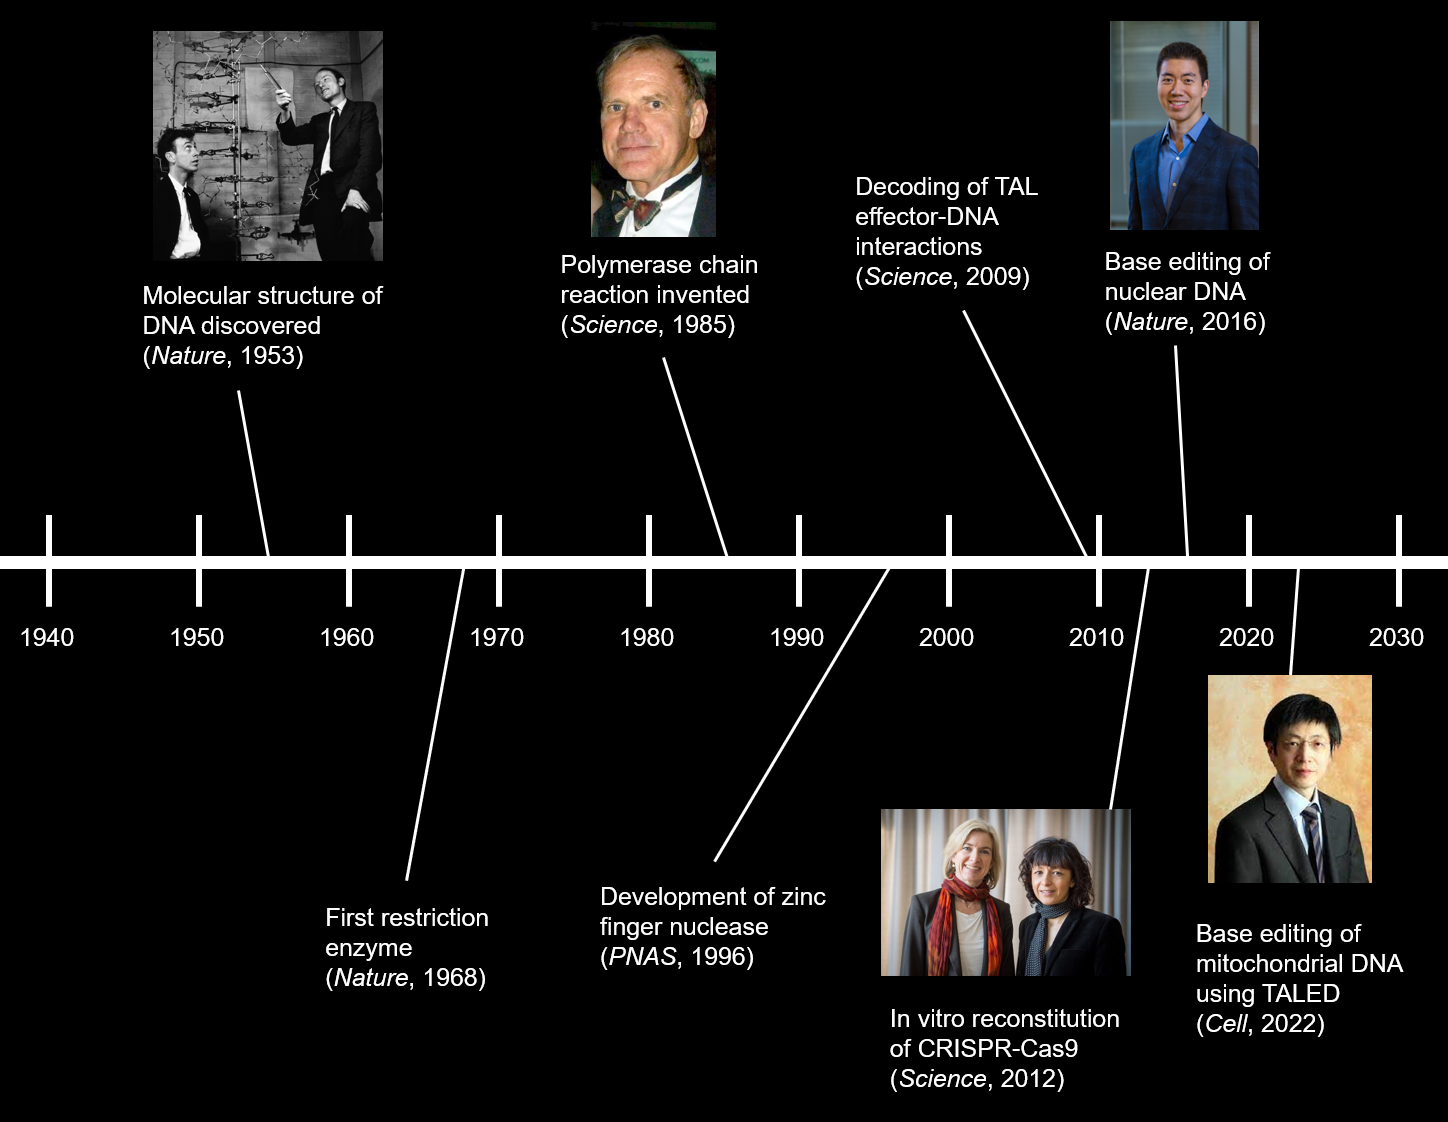 Figure 1. Historical timeline of major discoveries in biotechnology.